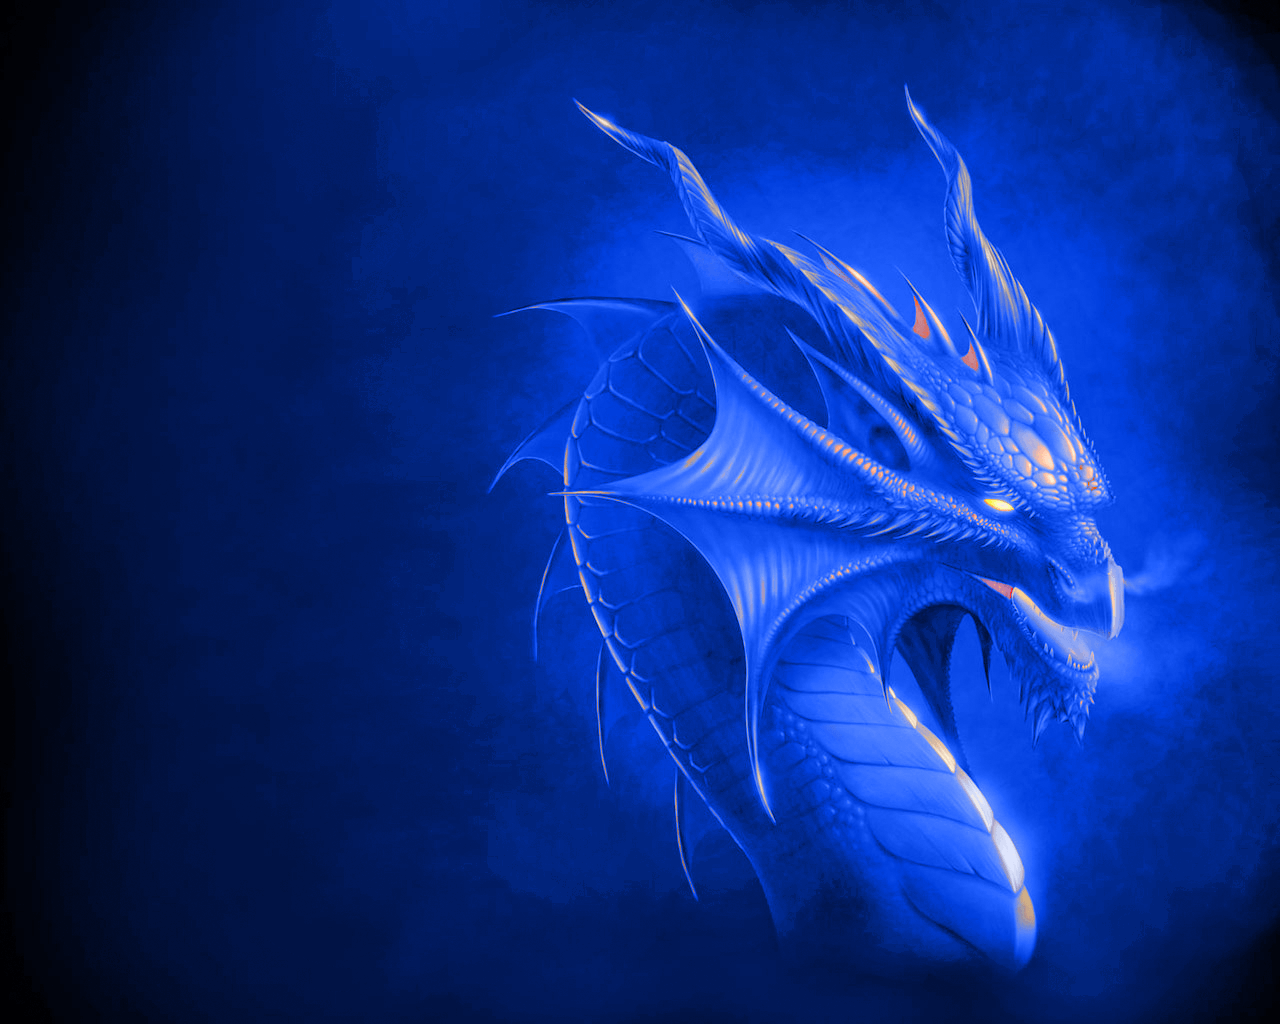 The Blue Dragon Wallpaper. Wallpaper For Background